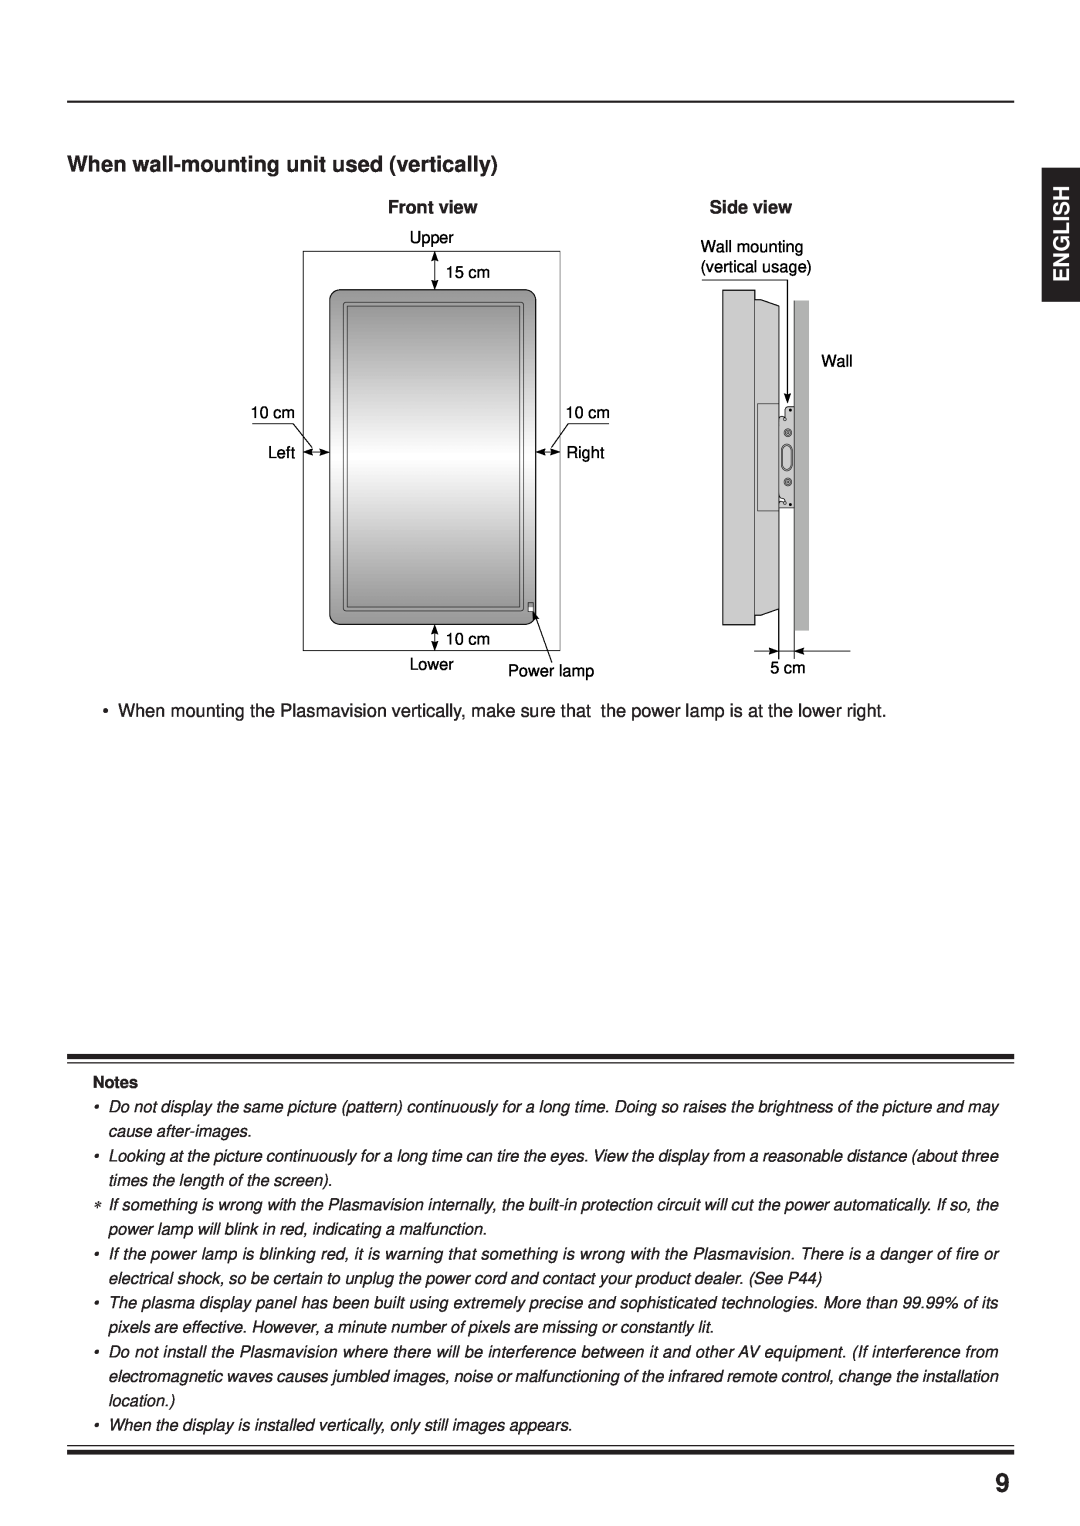 Fujitsu PDS4203W-H / PDS4203E-H user manual When wall-mounting unit used vertically, English, Front view, Side view 